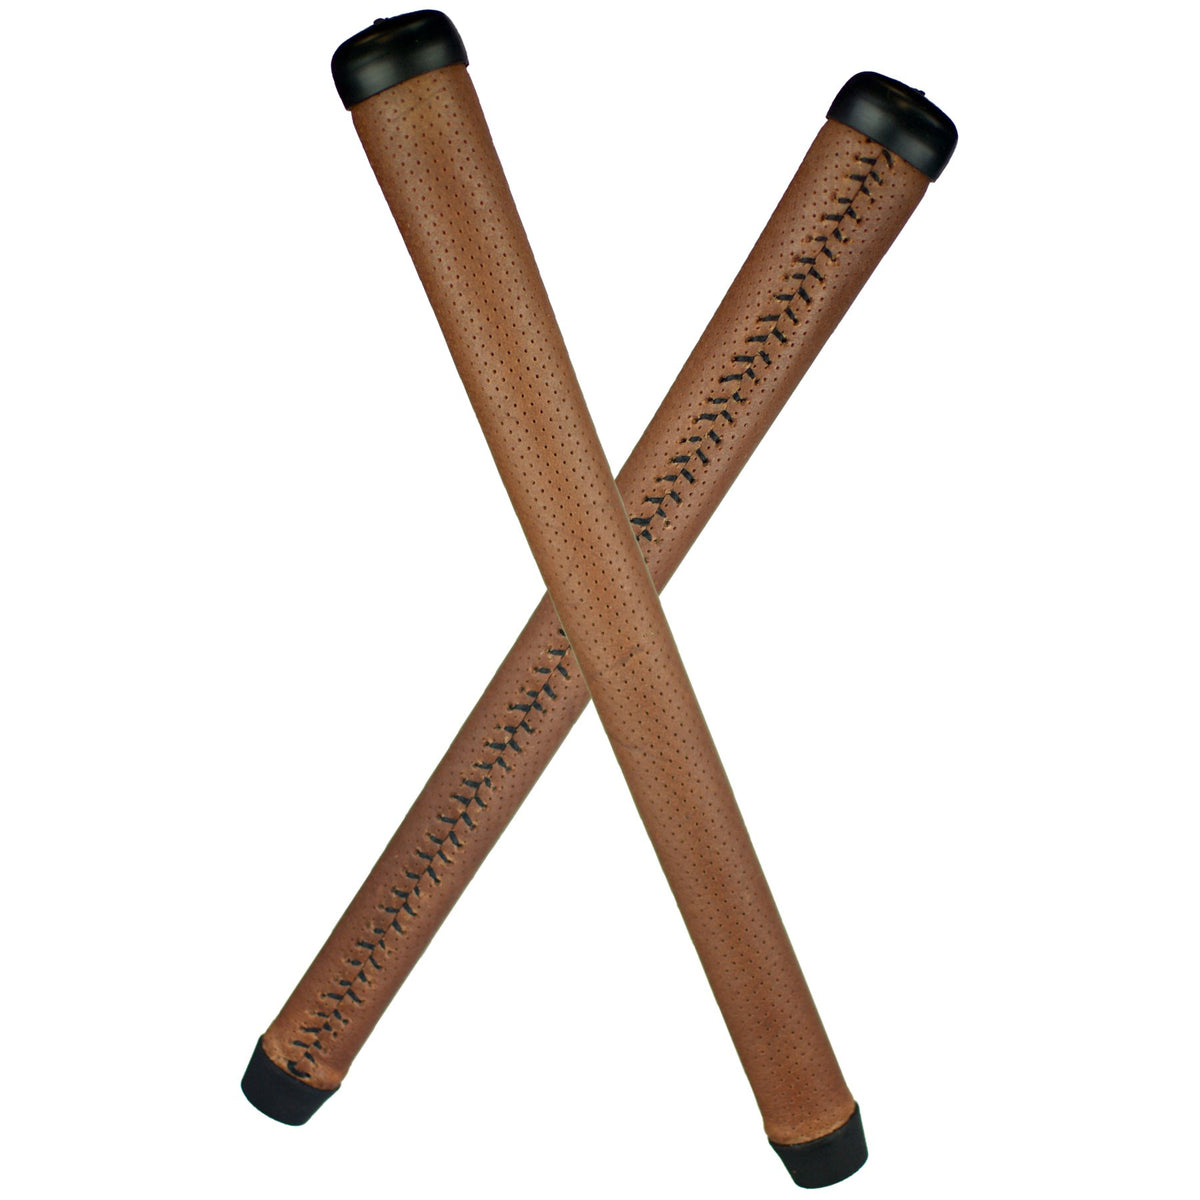 New Stacked Leather Rod Grips, What's New on the Market